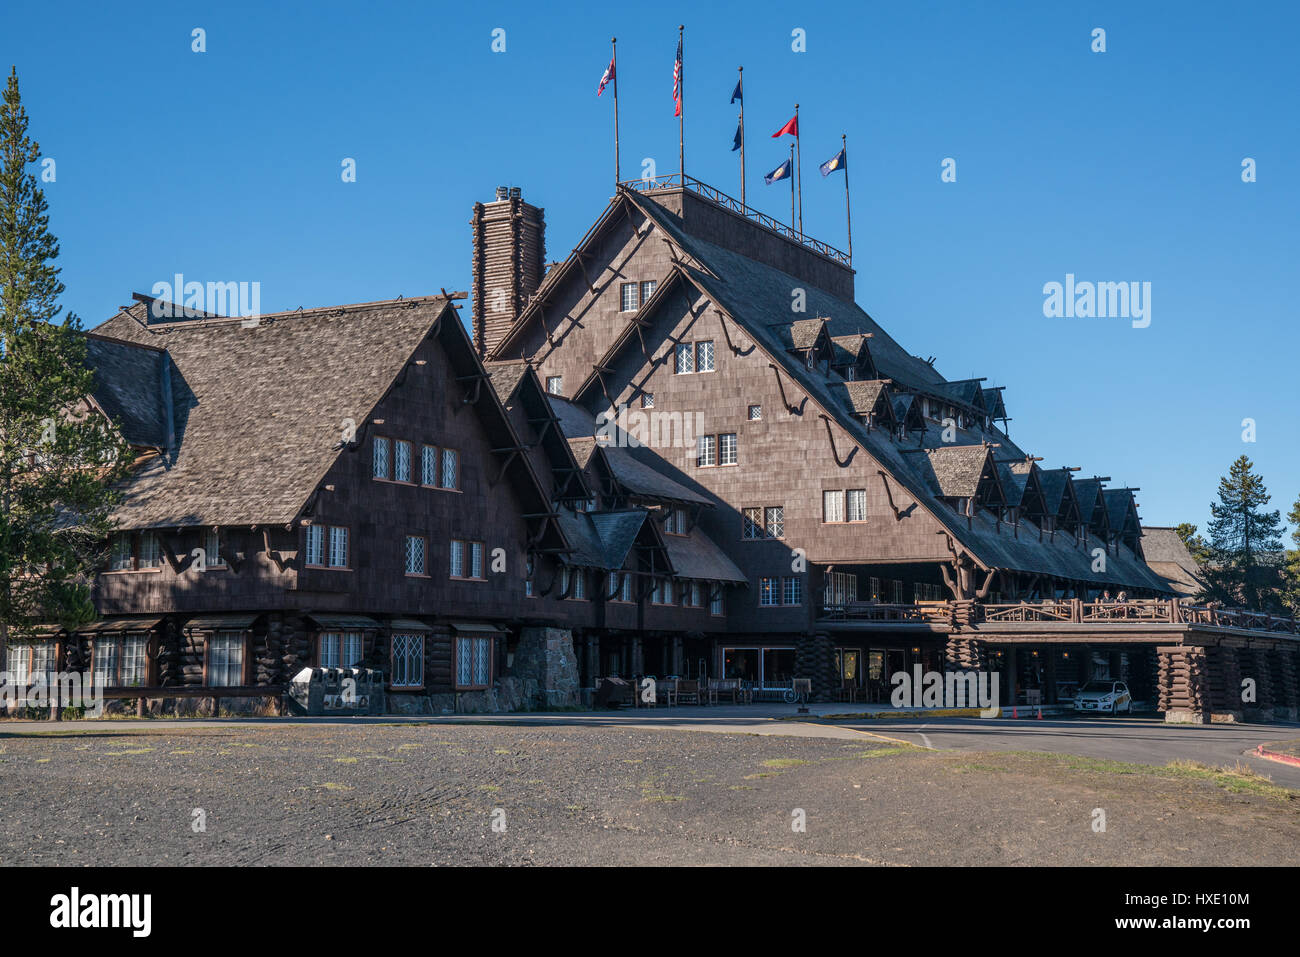 YELLOWSTONE, WY - SEPTEMBER 27: Exterior of the historic Old Faithful Inn in Yellowstone National Park, Wyoming.  Built in 1904, the inn is considered Stock Photo